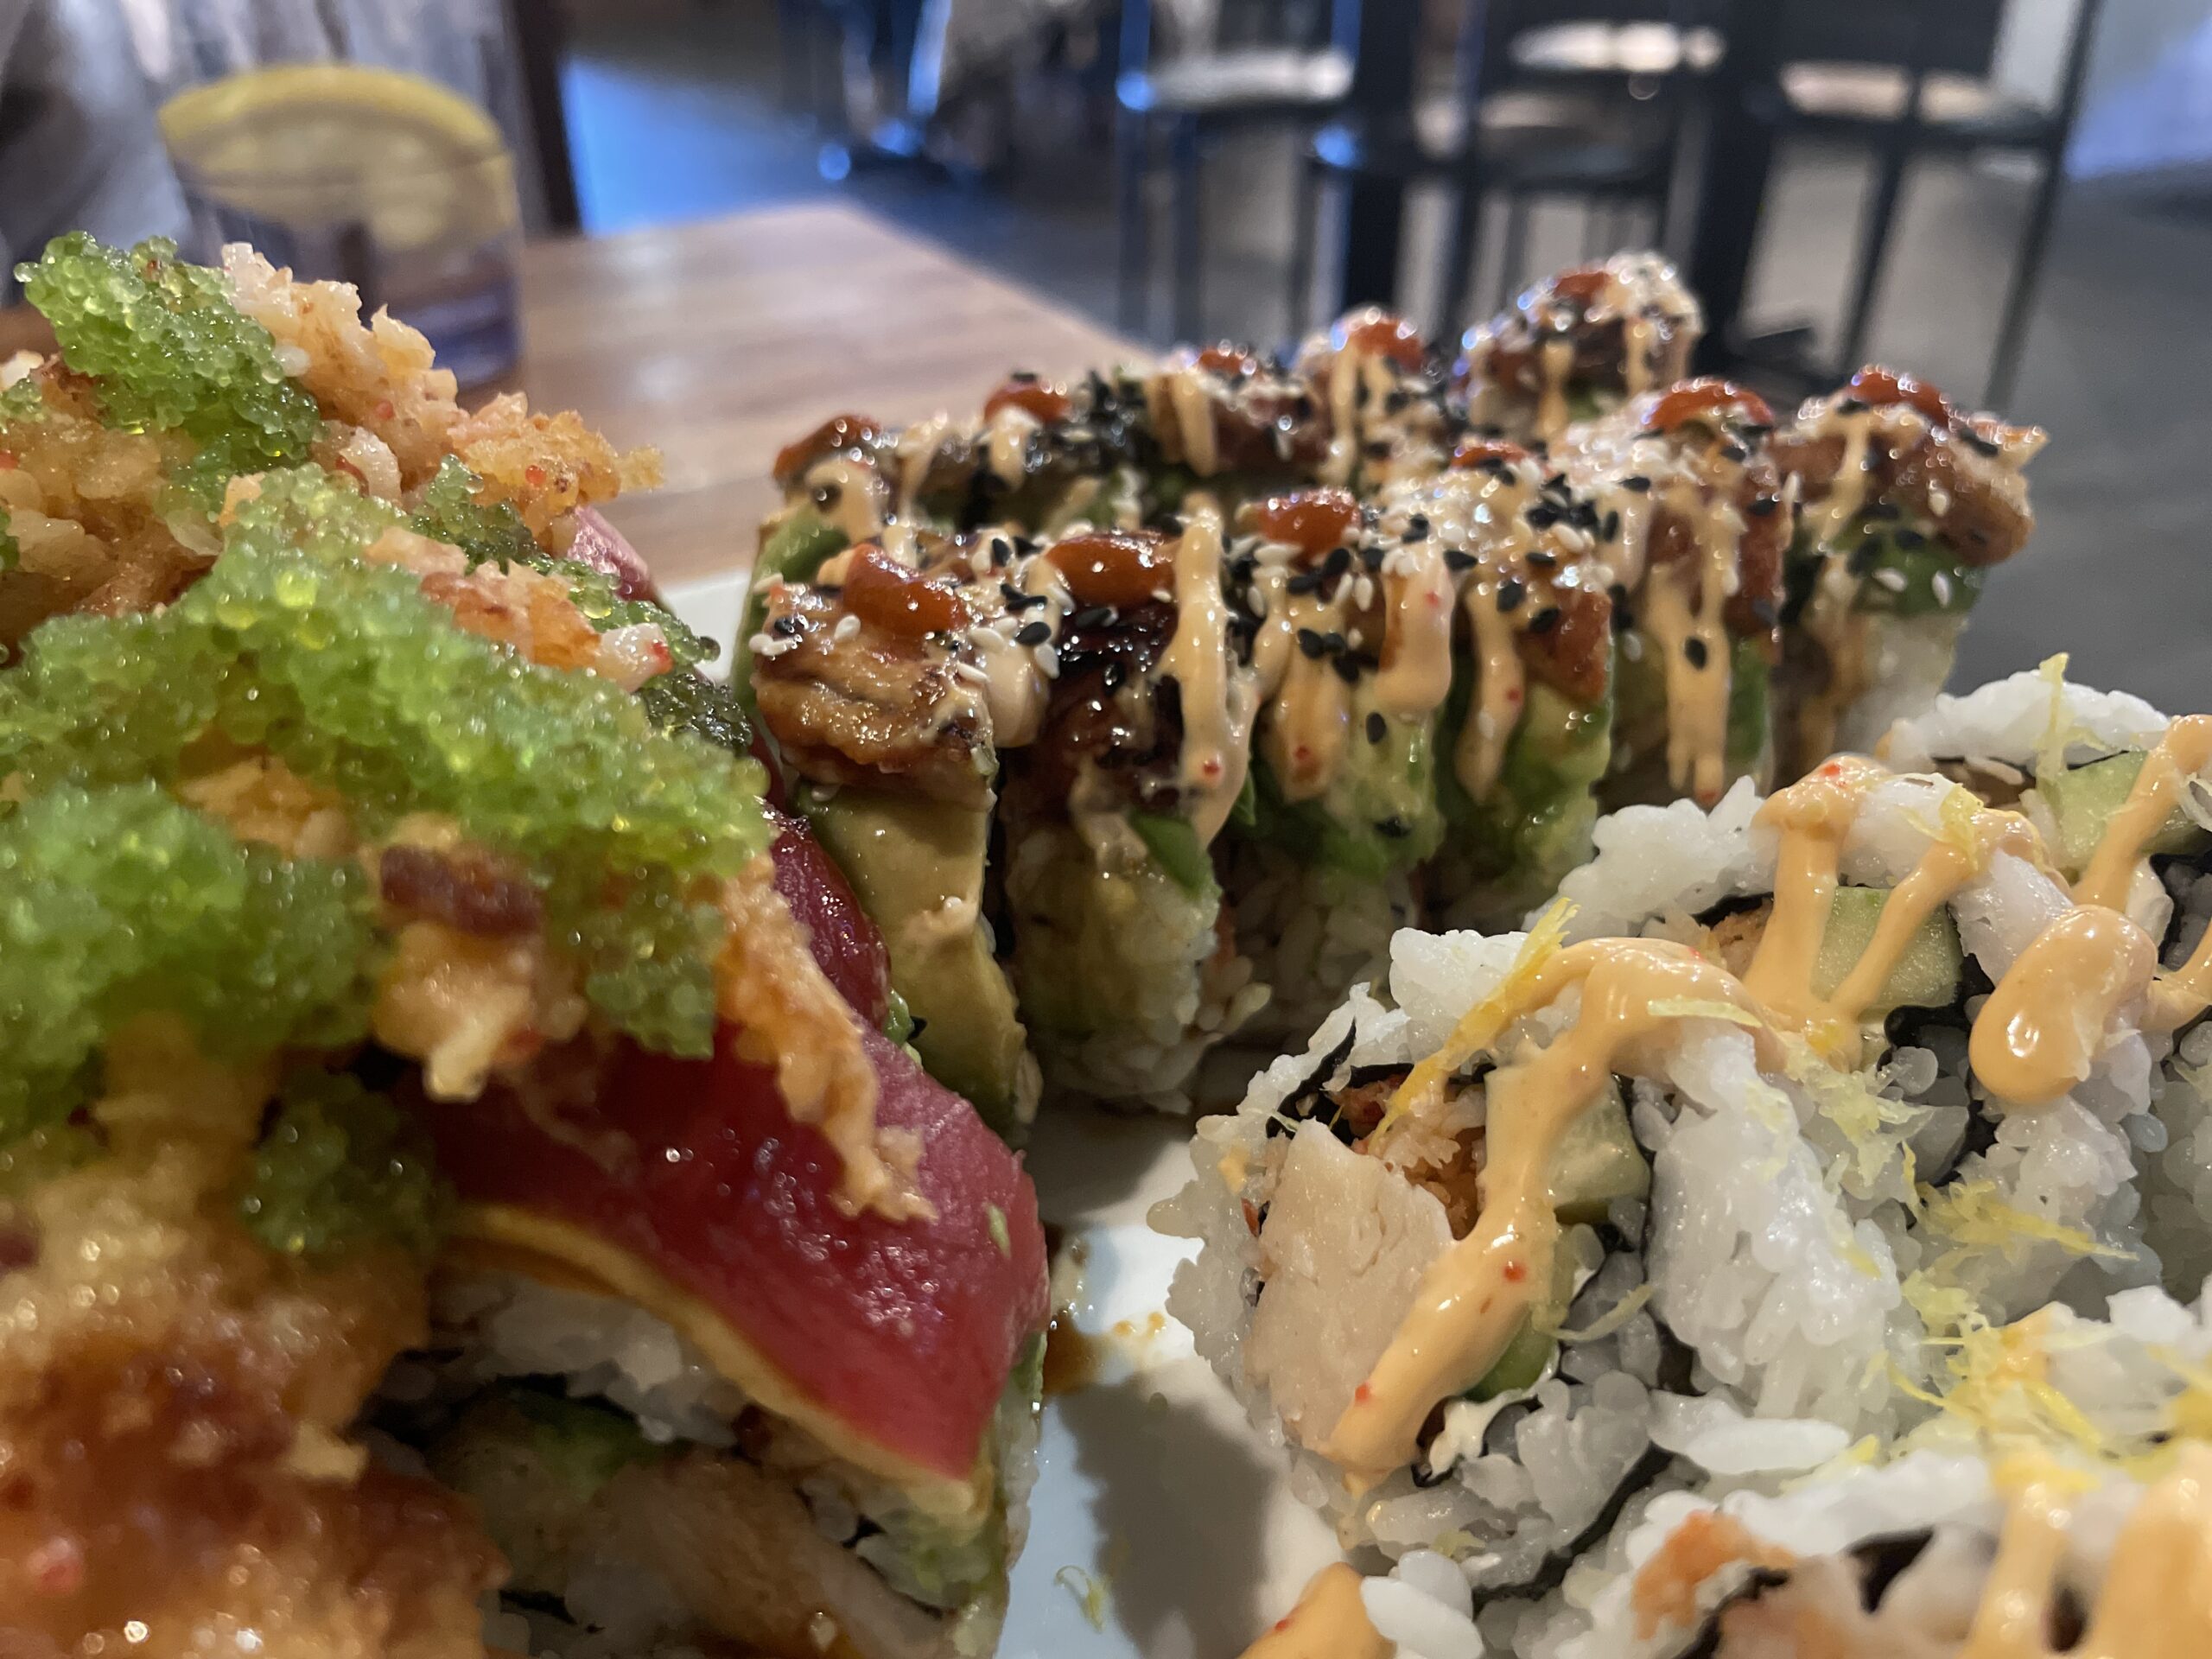 Rattlesnake, Green Dragon, and Bangar sushi rolls from Willowcreek Grill and Raw Sushi in Boise, Idaho.